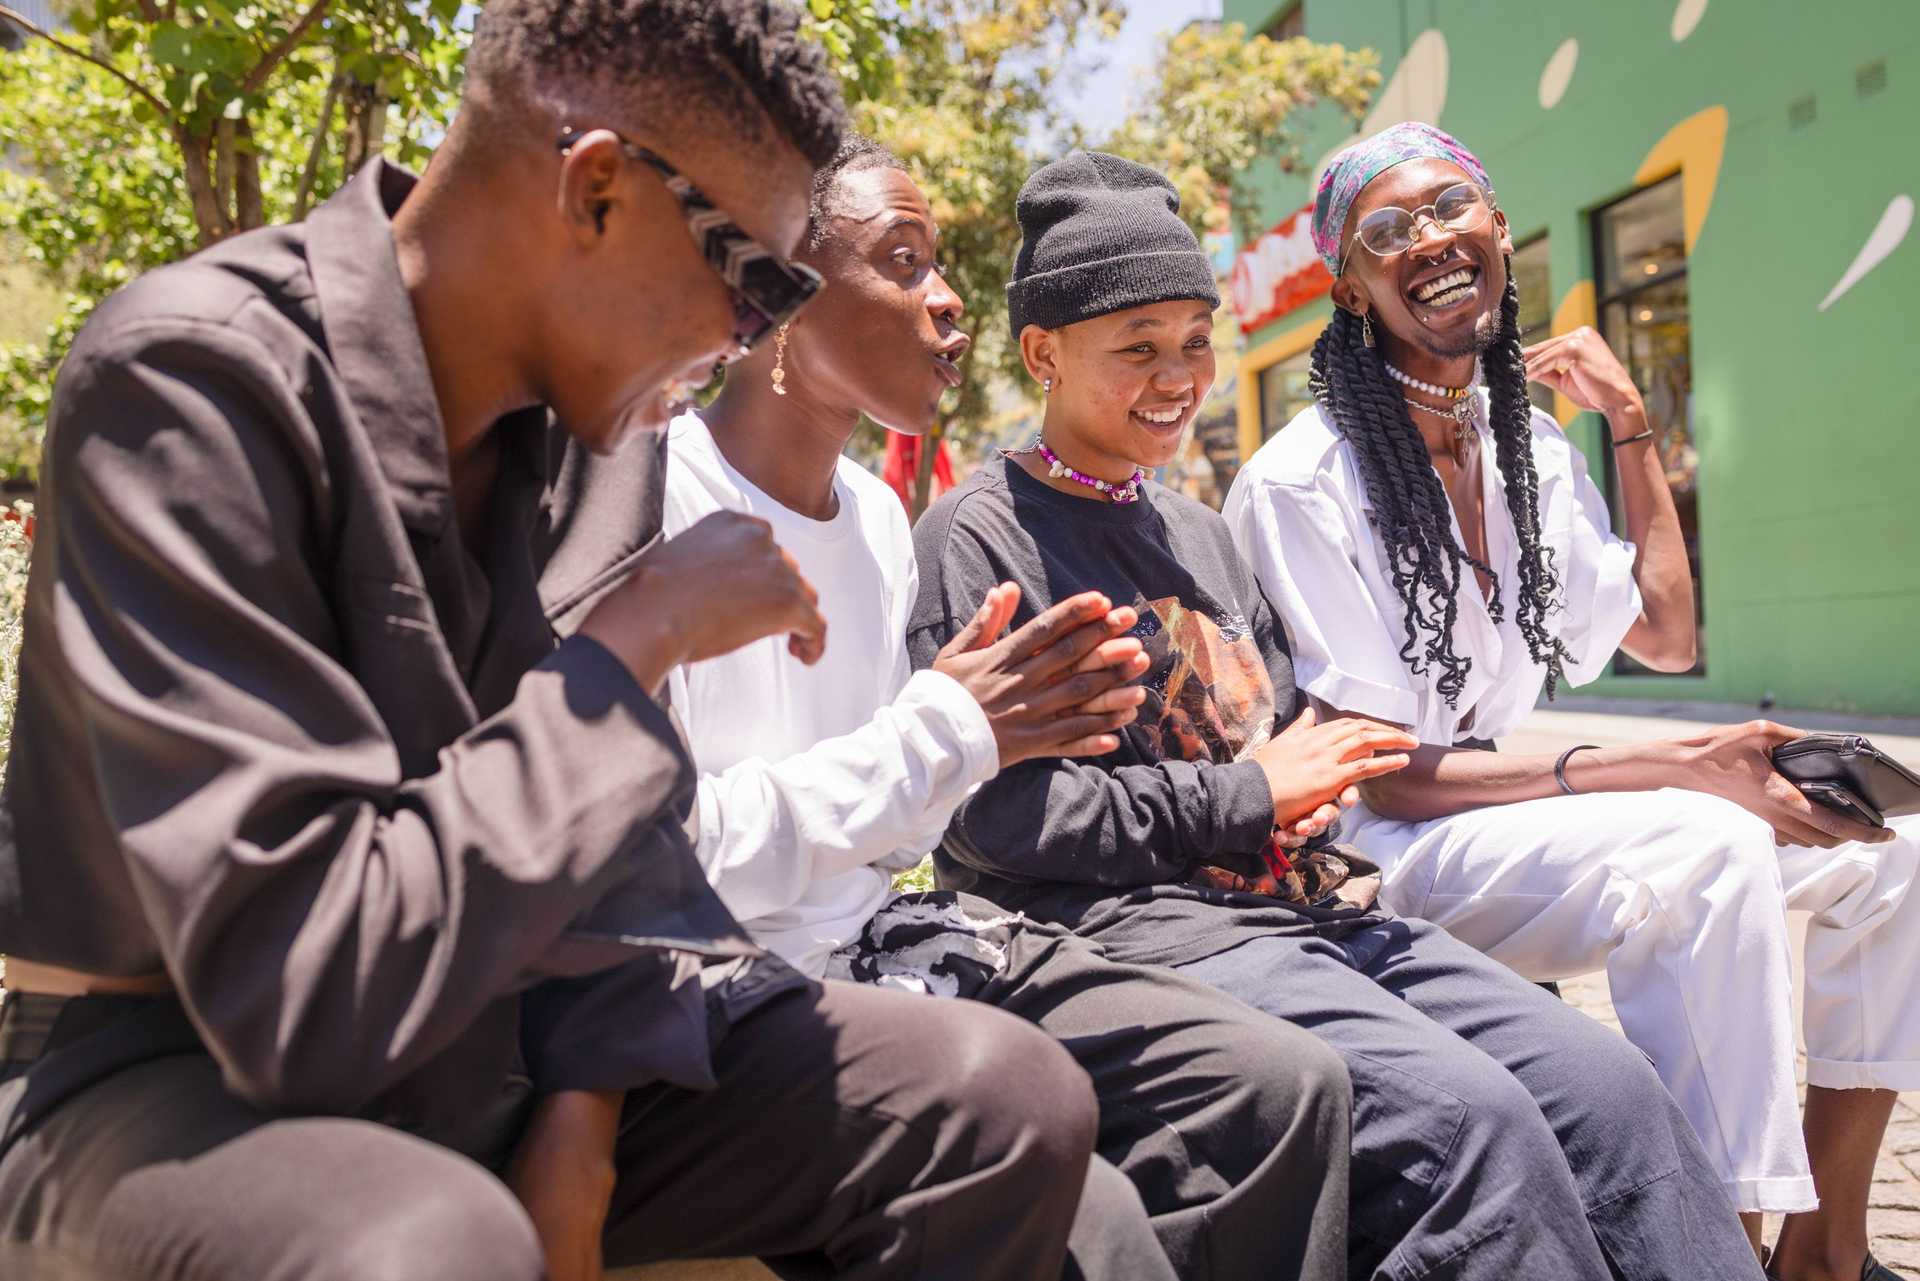 Young people smiling in Johannesburg, South Africa